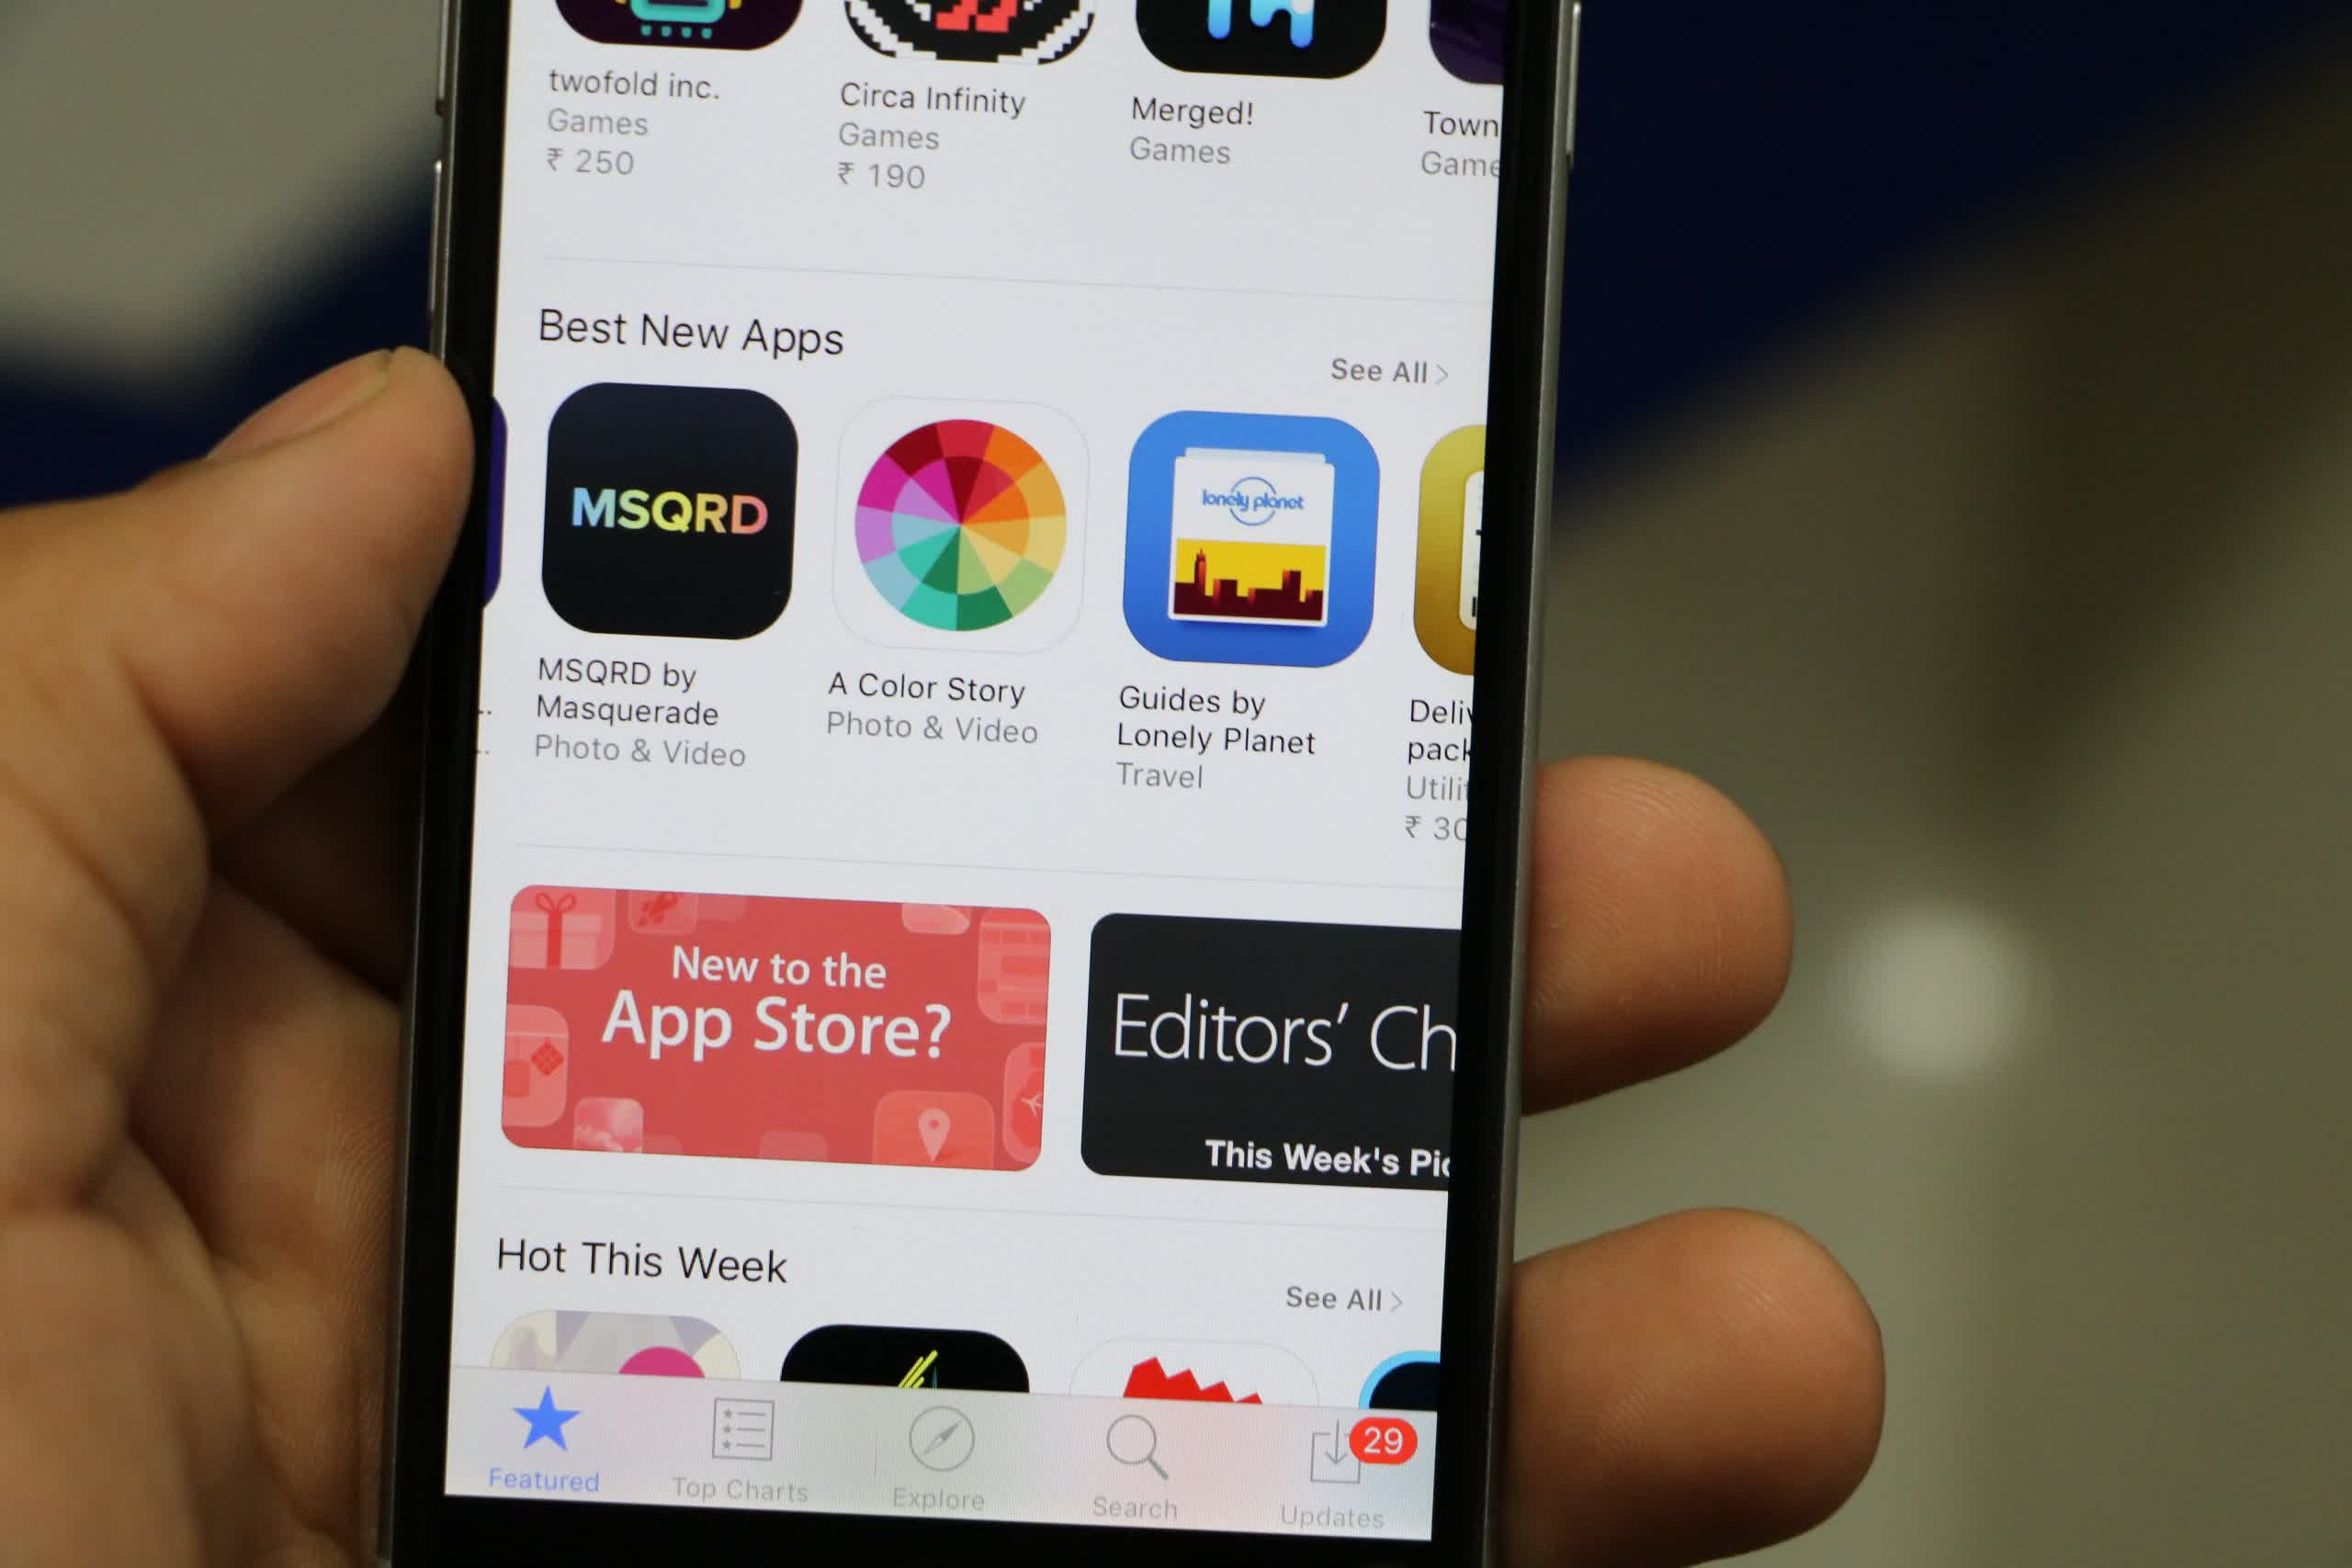 Apple quietly adds an App Store feature for reporting scam apps